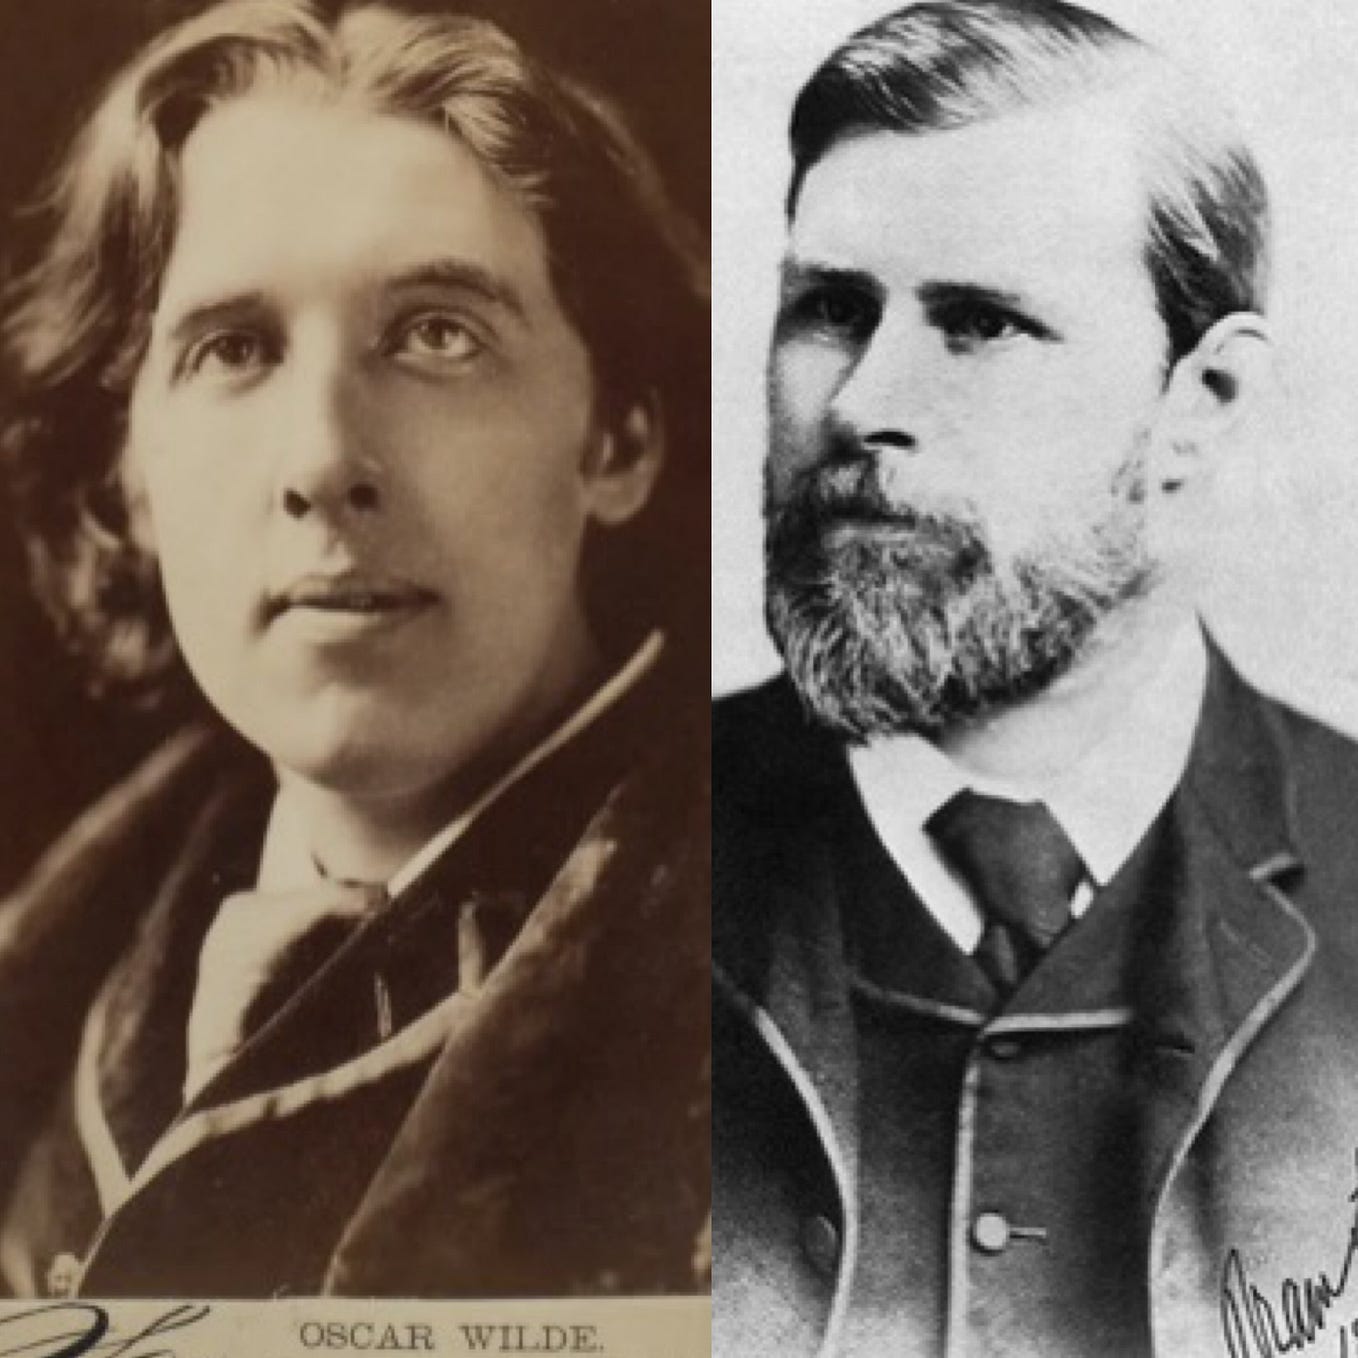 The Rivalry of the Dracula and Dorian Gray Authors